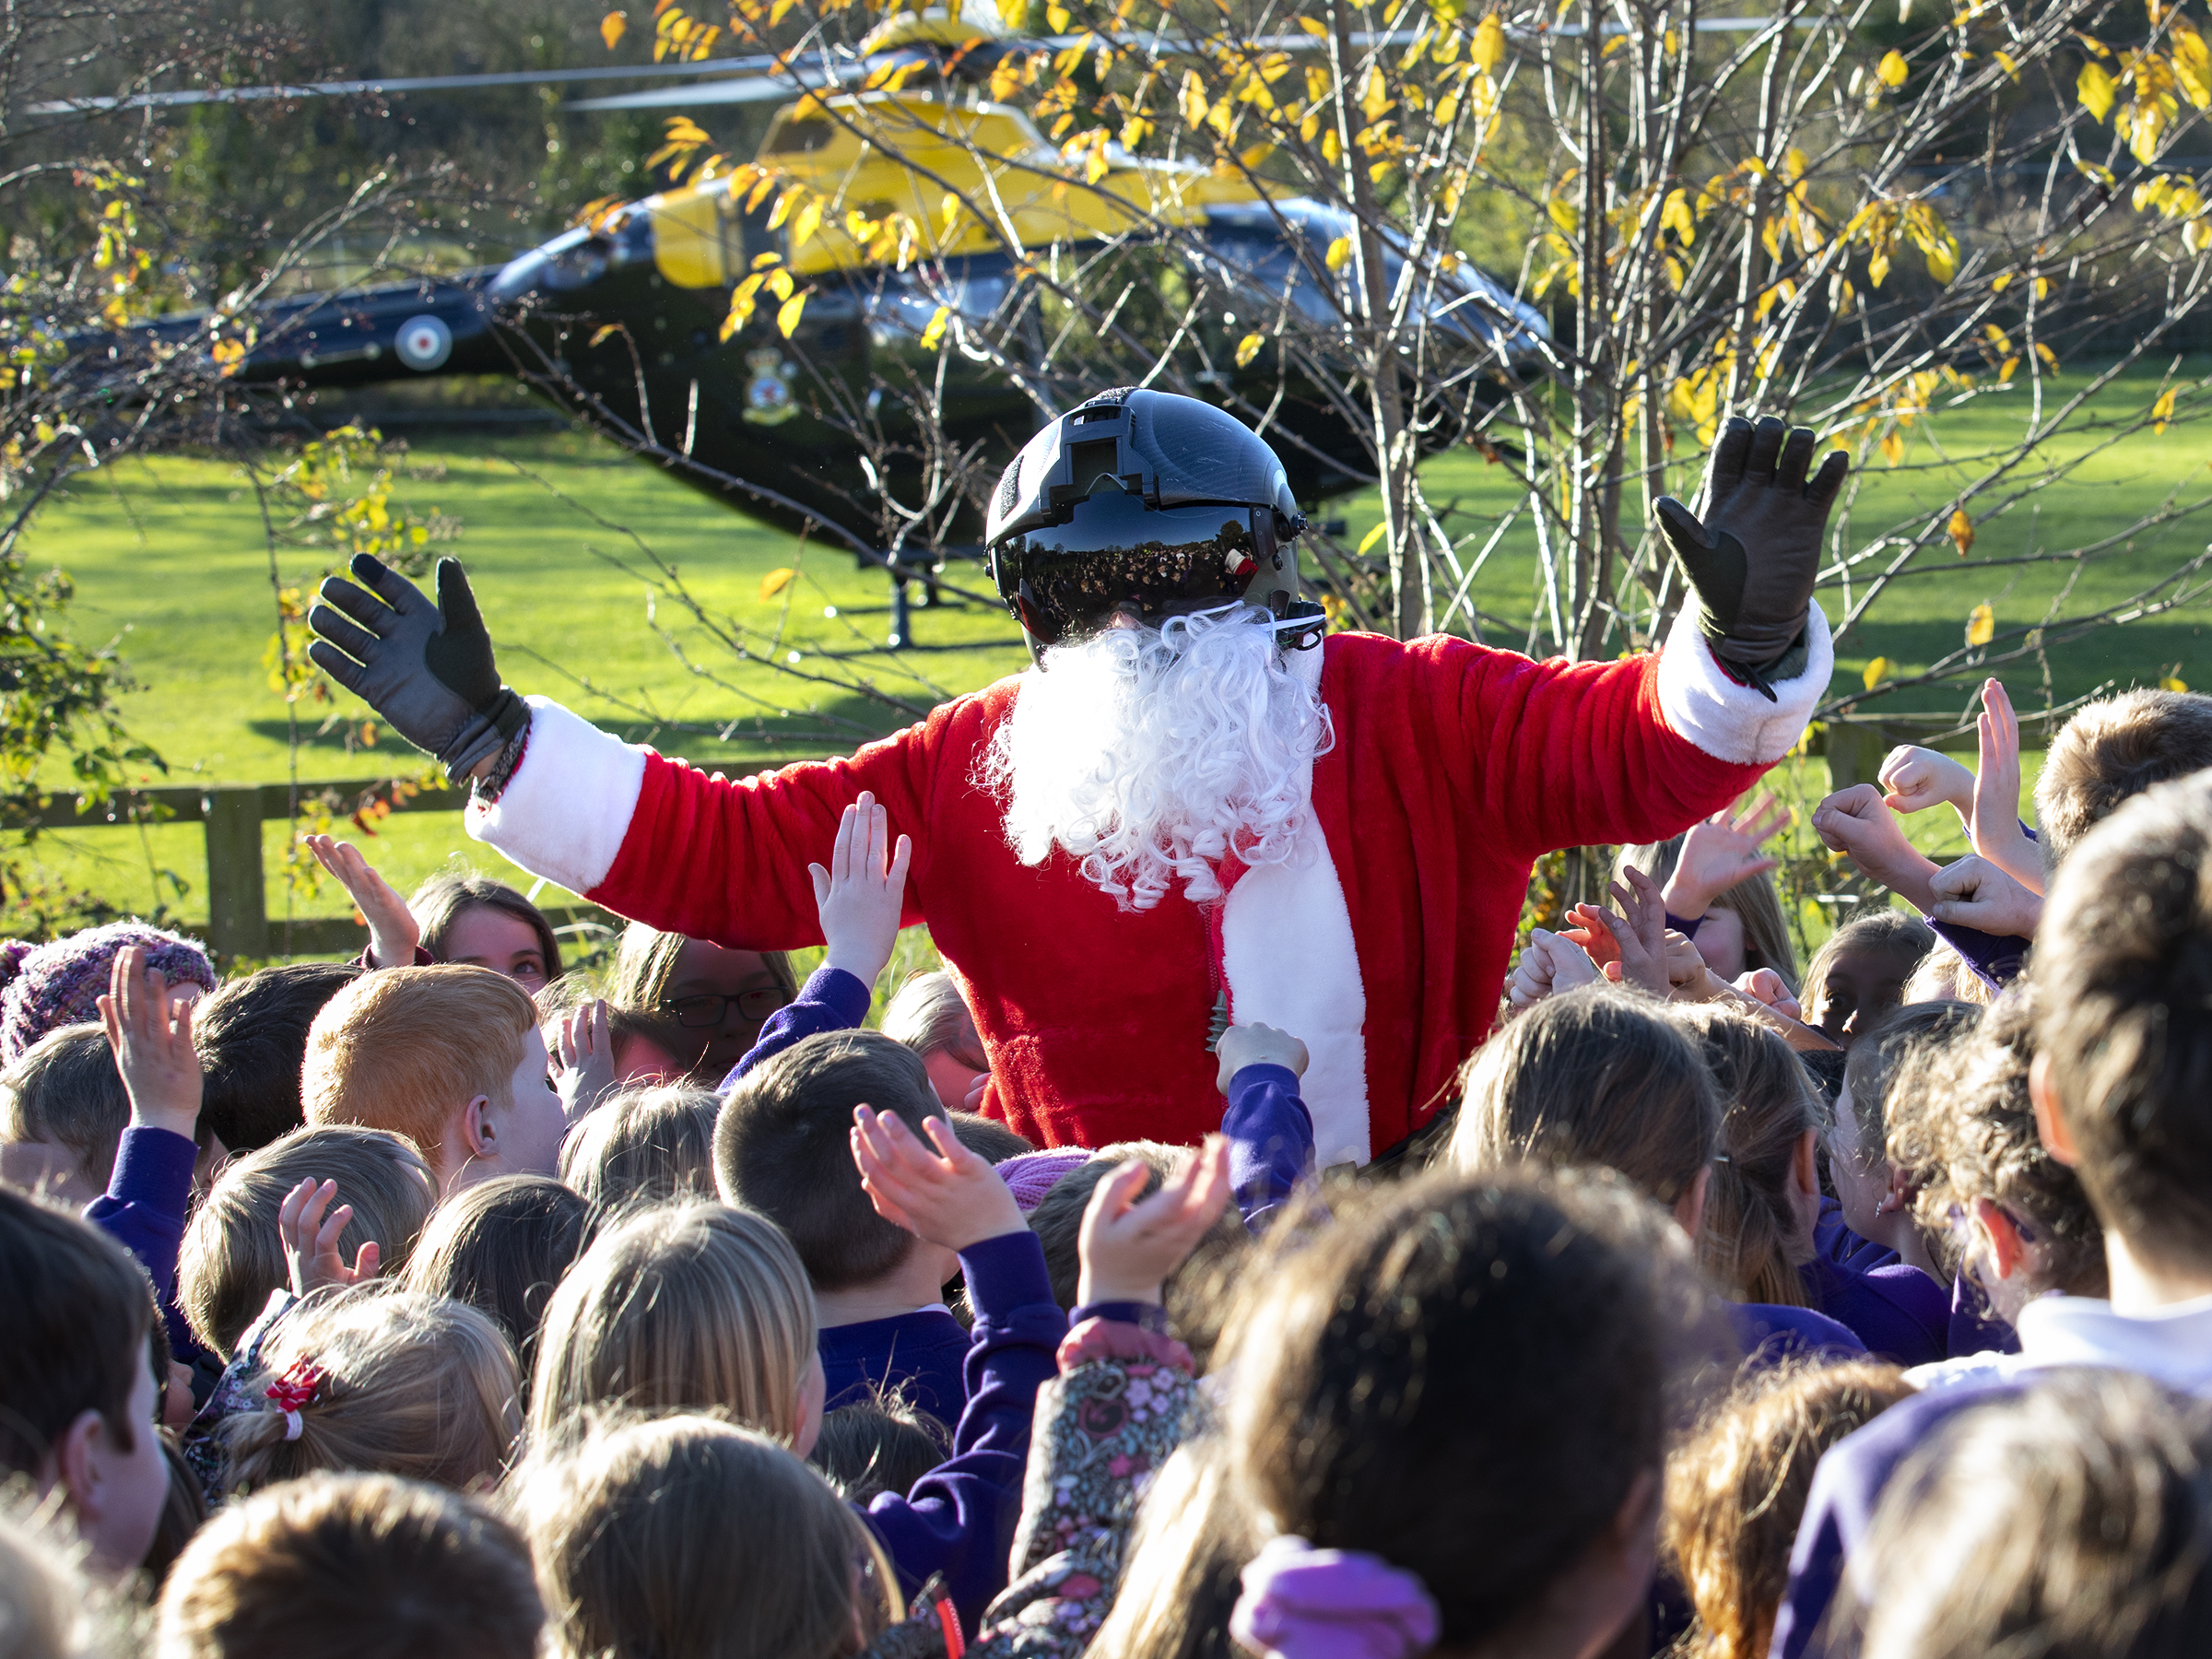 Santa Claus wearing a visor helmet and surrounded by schoolchildren, with a helicopter in the background.